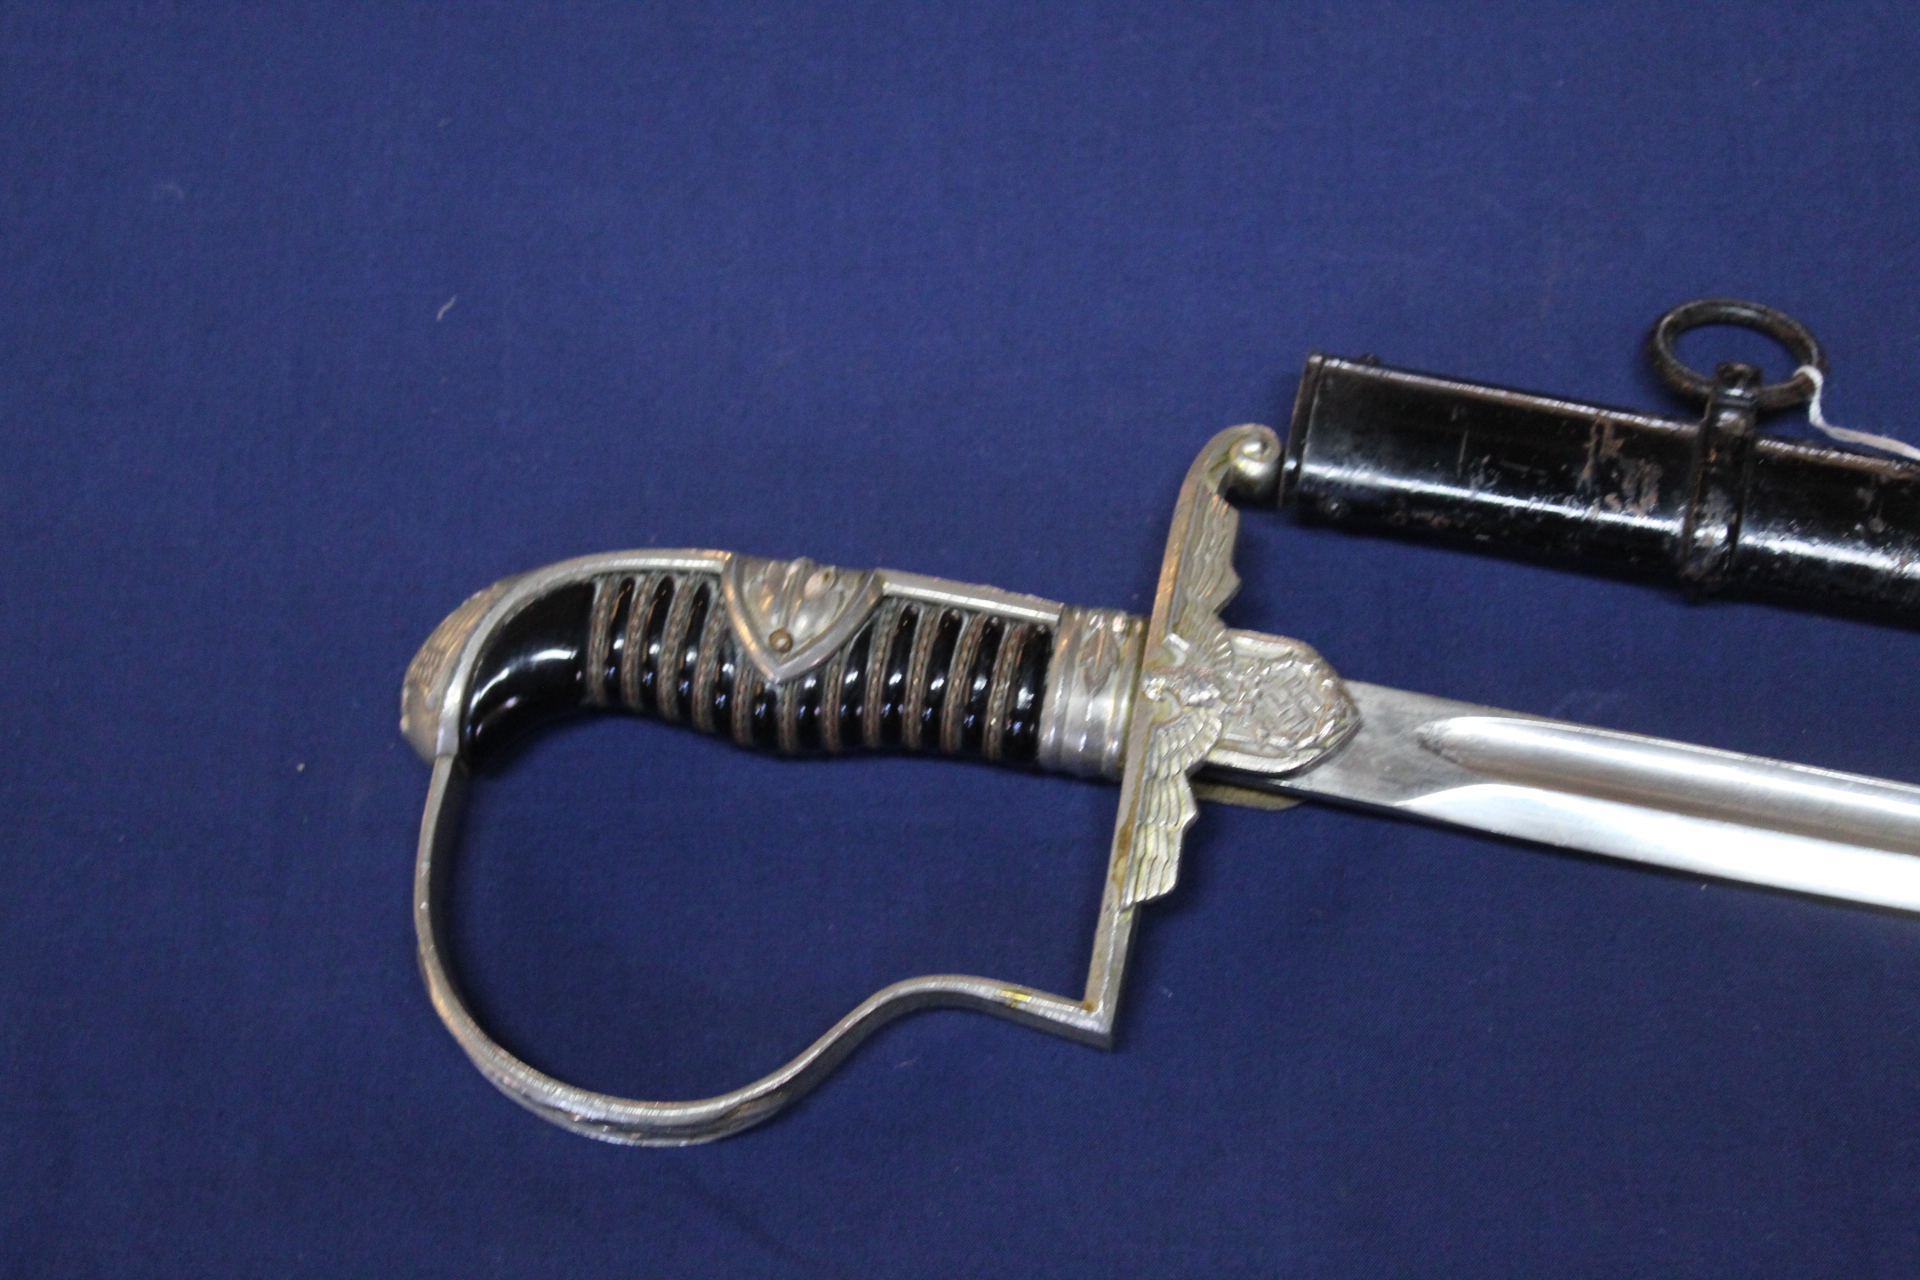 A German Third Reich era Army Officers dress sword by Eickhorn Solingen with scabbard - Image 2 of 2